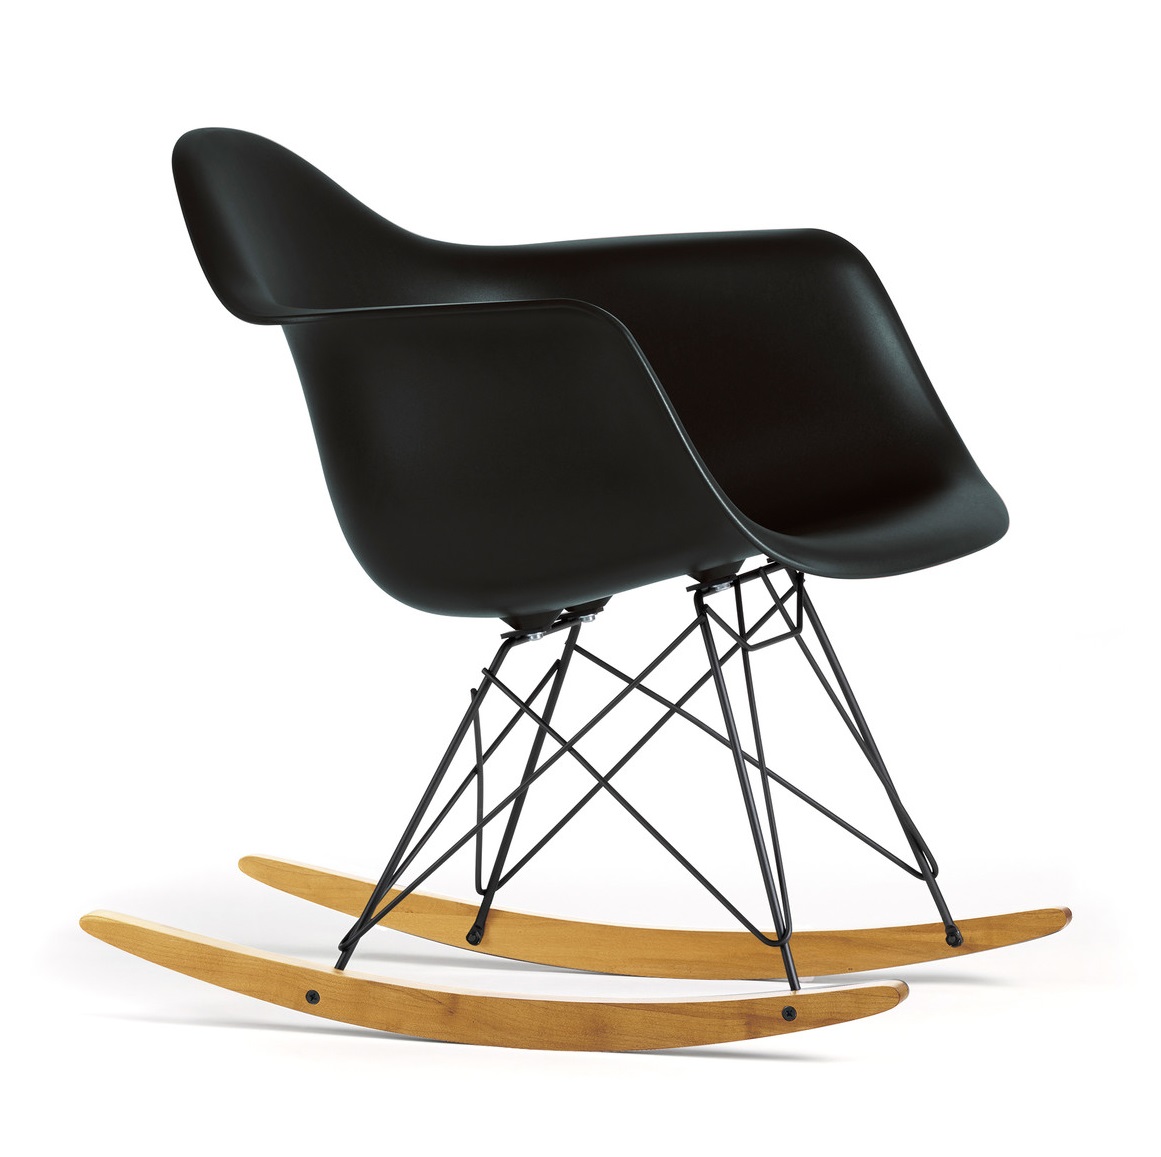 RAR CHAIR 690 x 625 x 795 mm PP Plastic, chrome steel, OAK wood. Designed by Charles and Ray Eames, 1948 Price: 1.000.000 VND